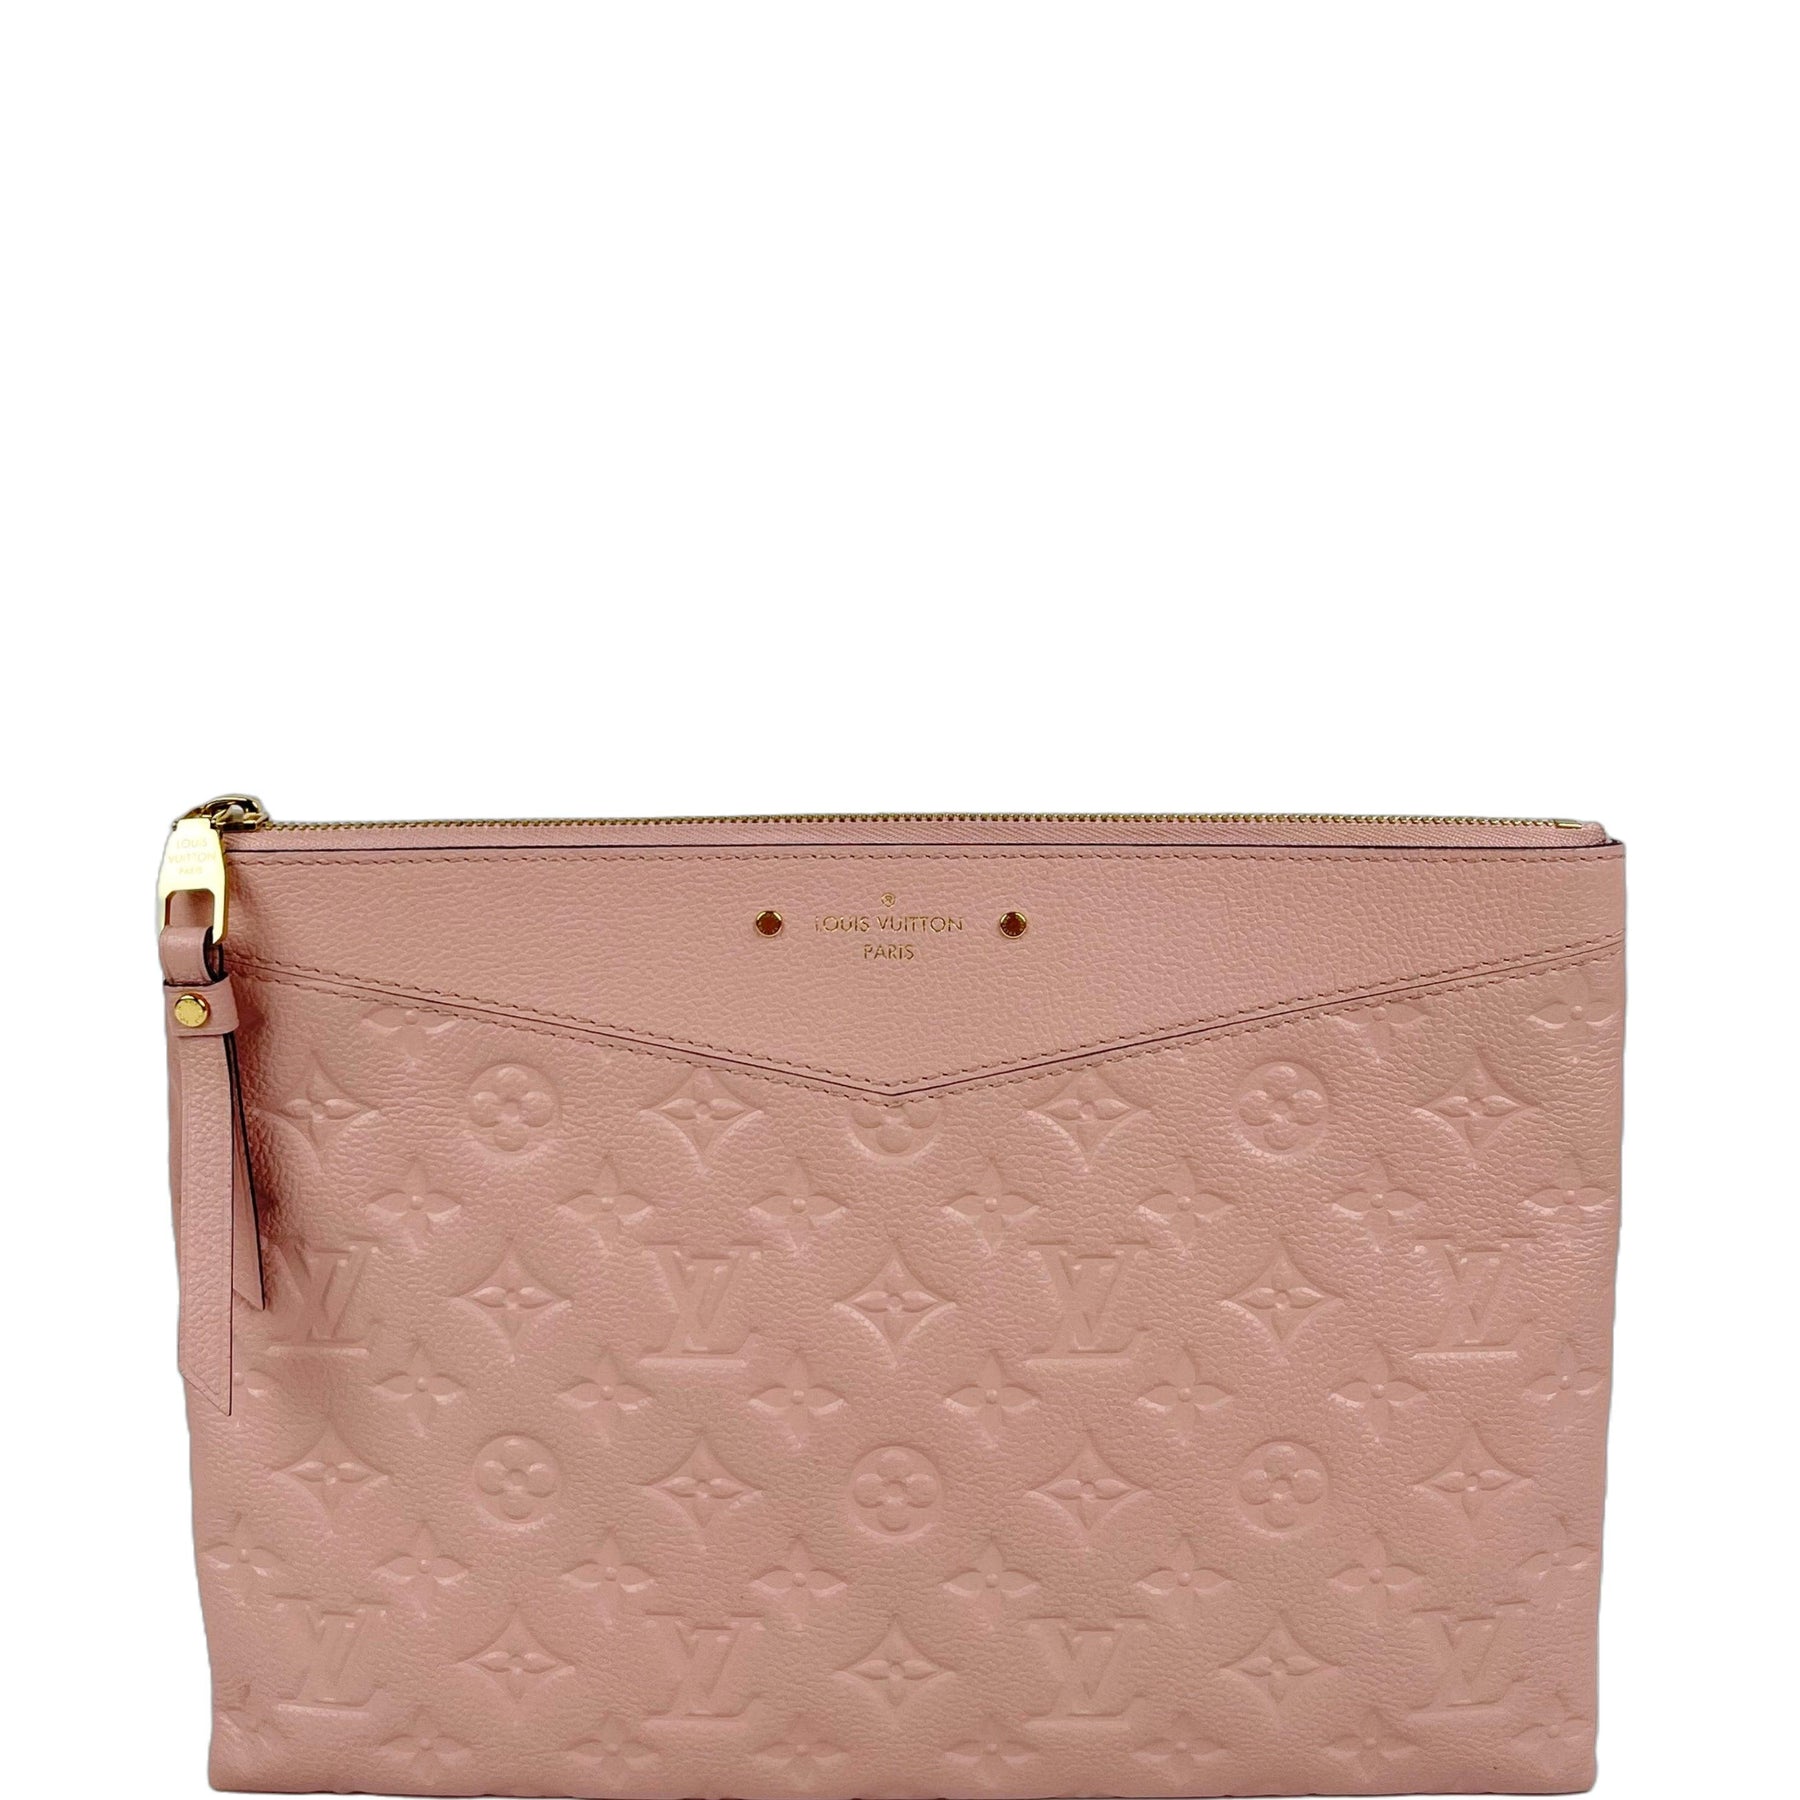 OnQueStyle on X: N E W Arrival 💞 @LouisVuitton Rose Poudre